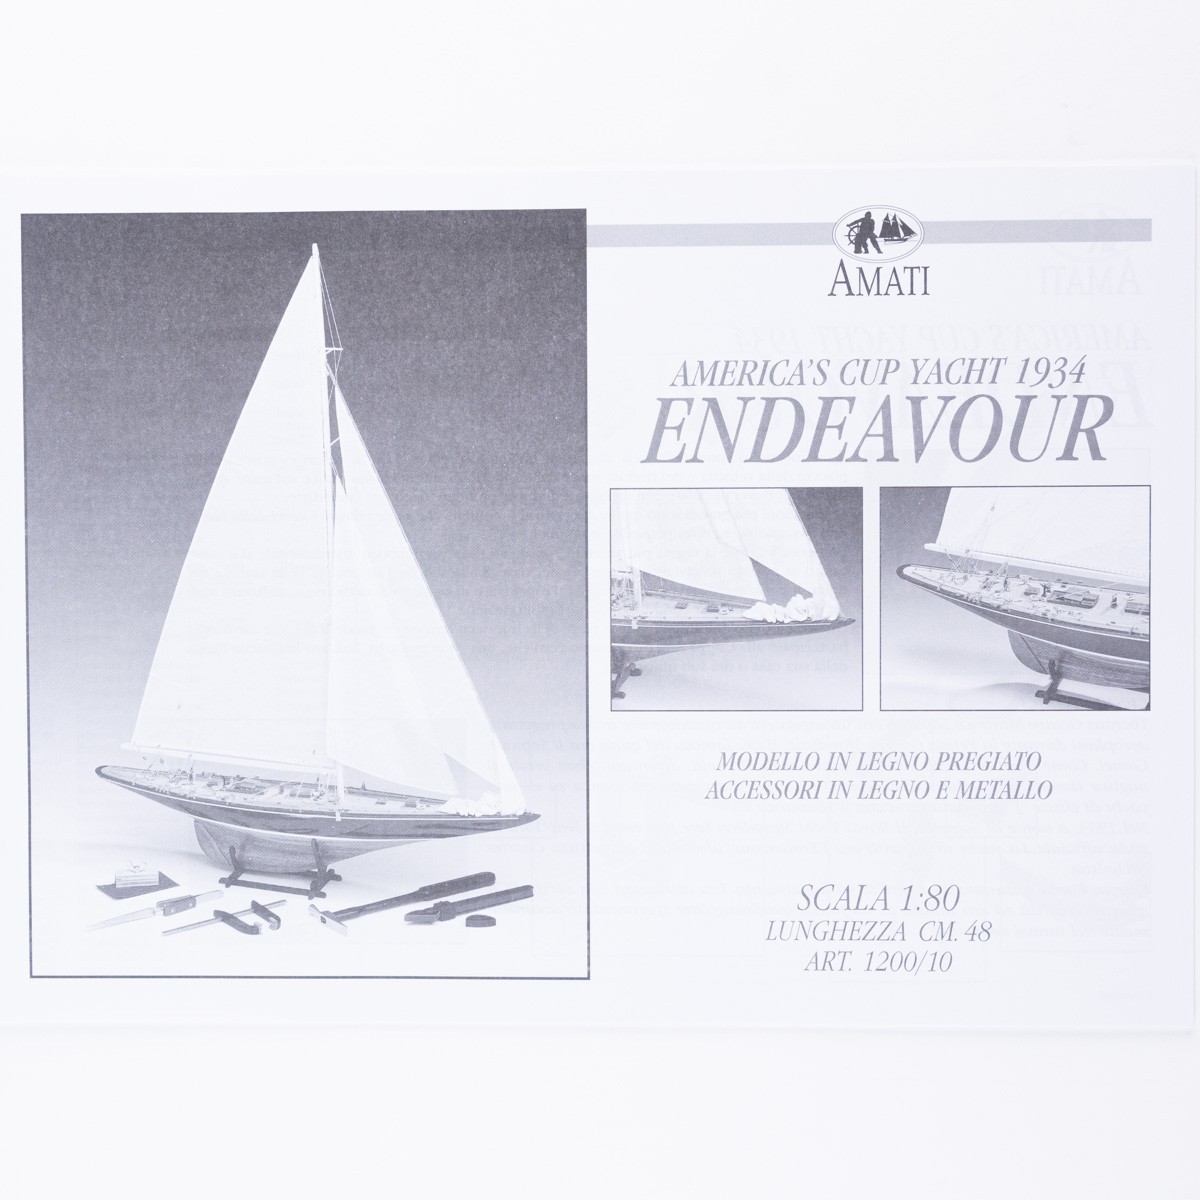 Endeavour Painted Sailing Boat Model 19.6 America Cup 